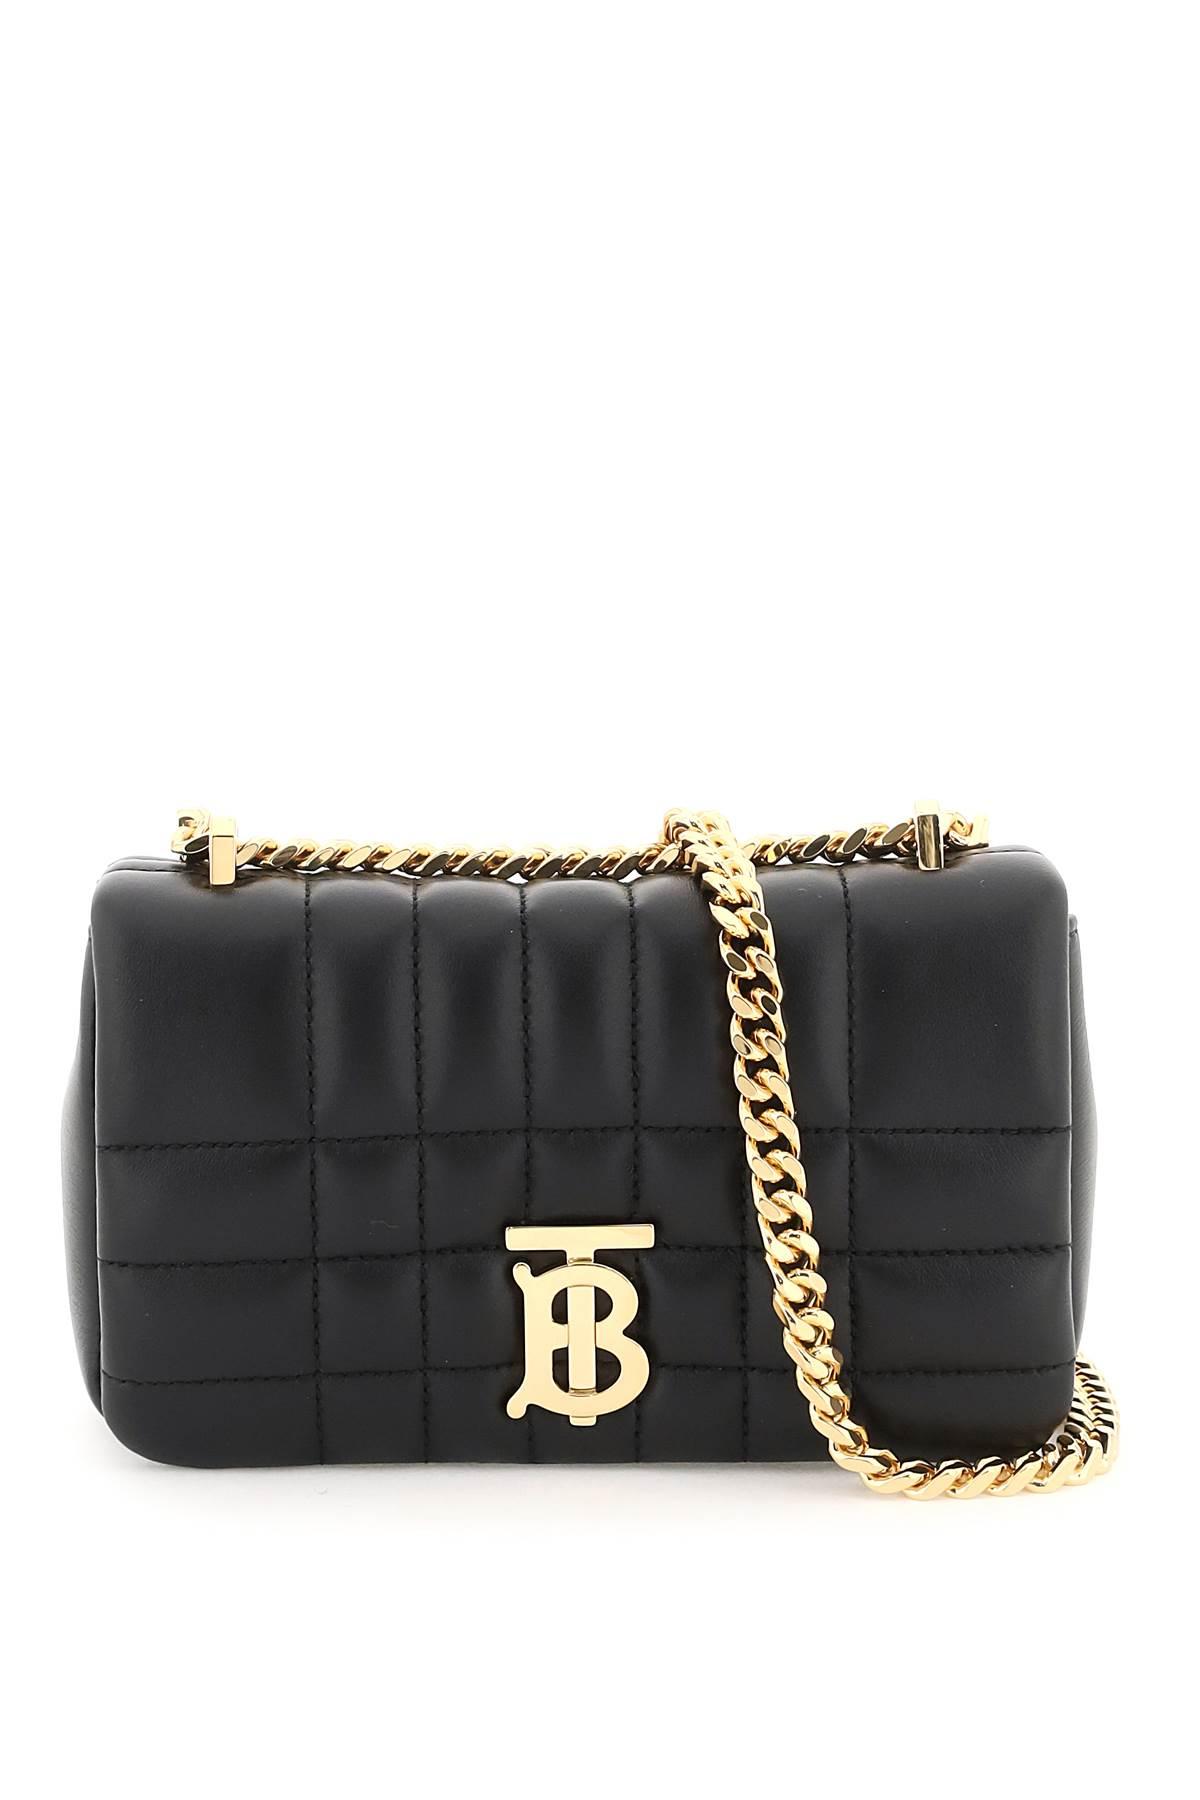 Burberry Lola Quilted leather mini bag